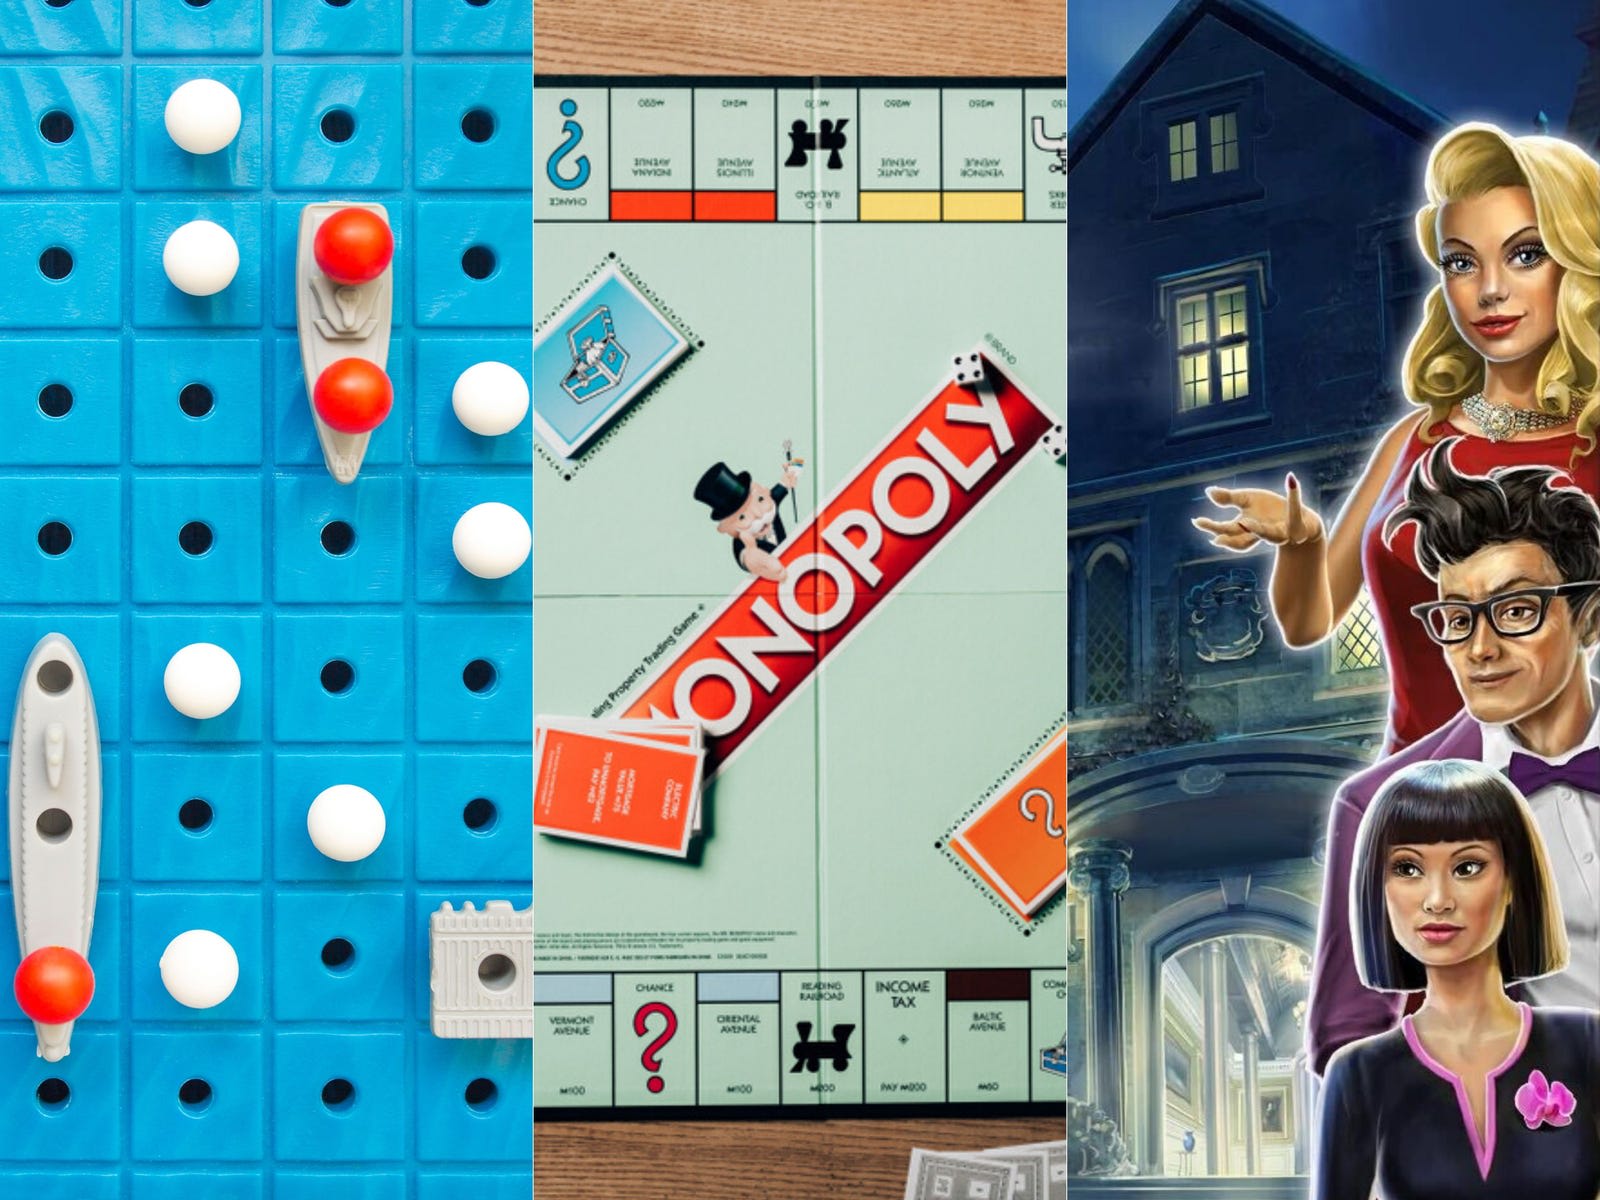 5 board games to play with friends & family online